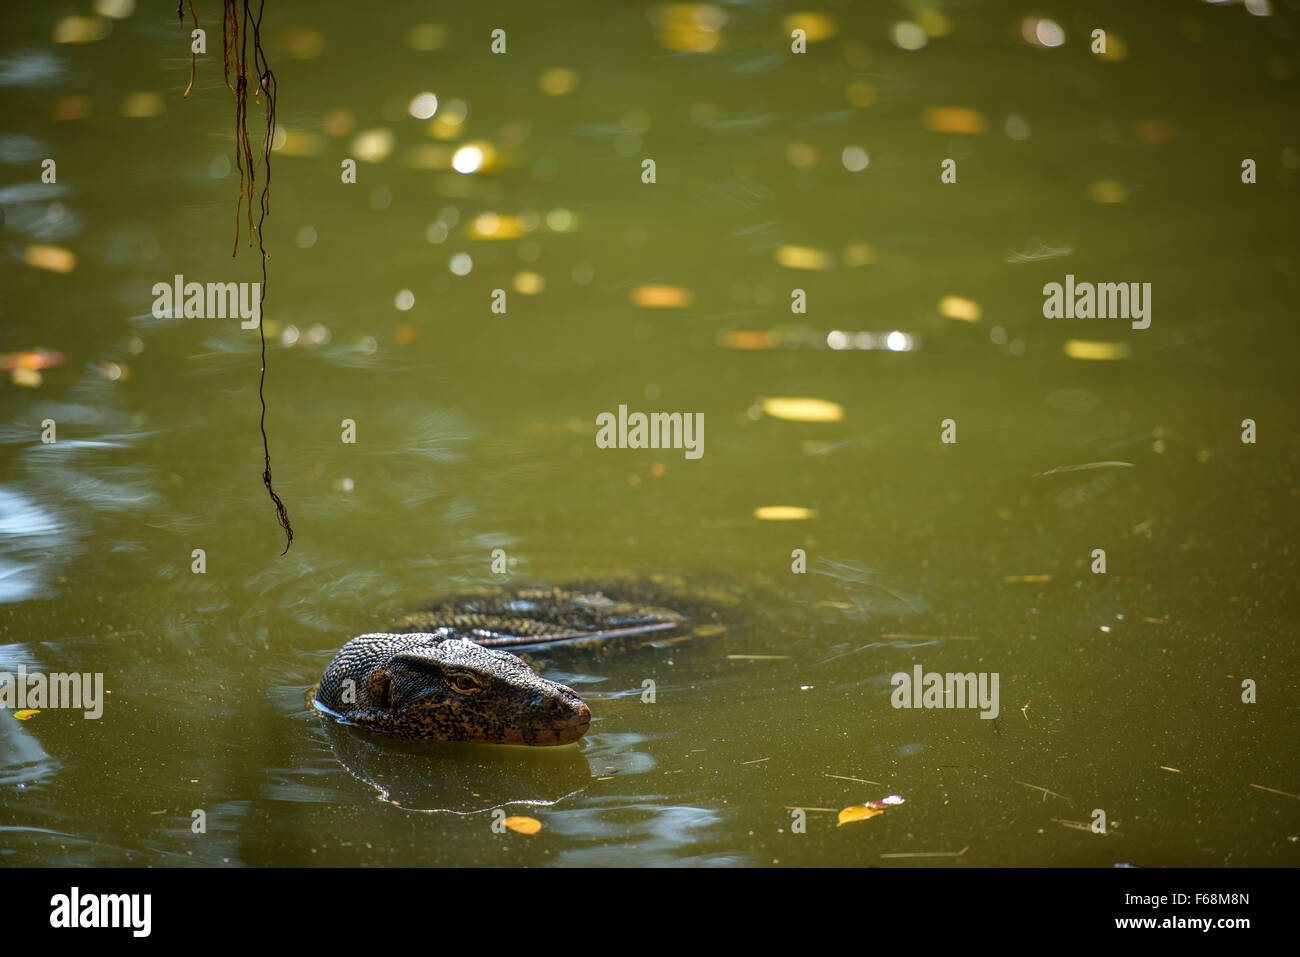 Asian water monitor swims in water, with copy space Stock Photo